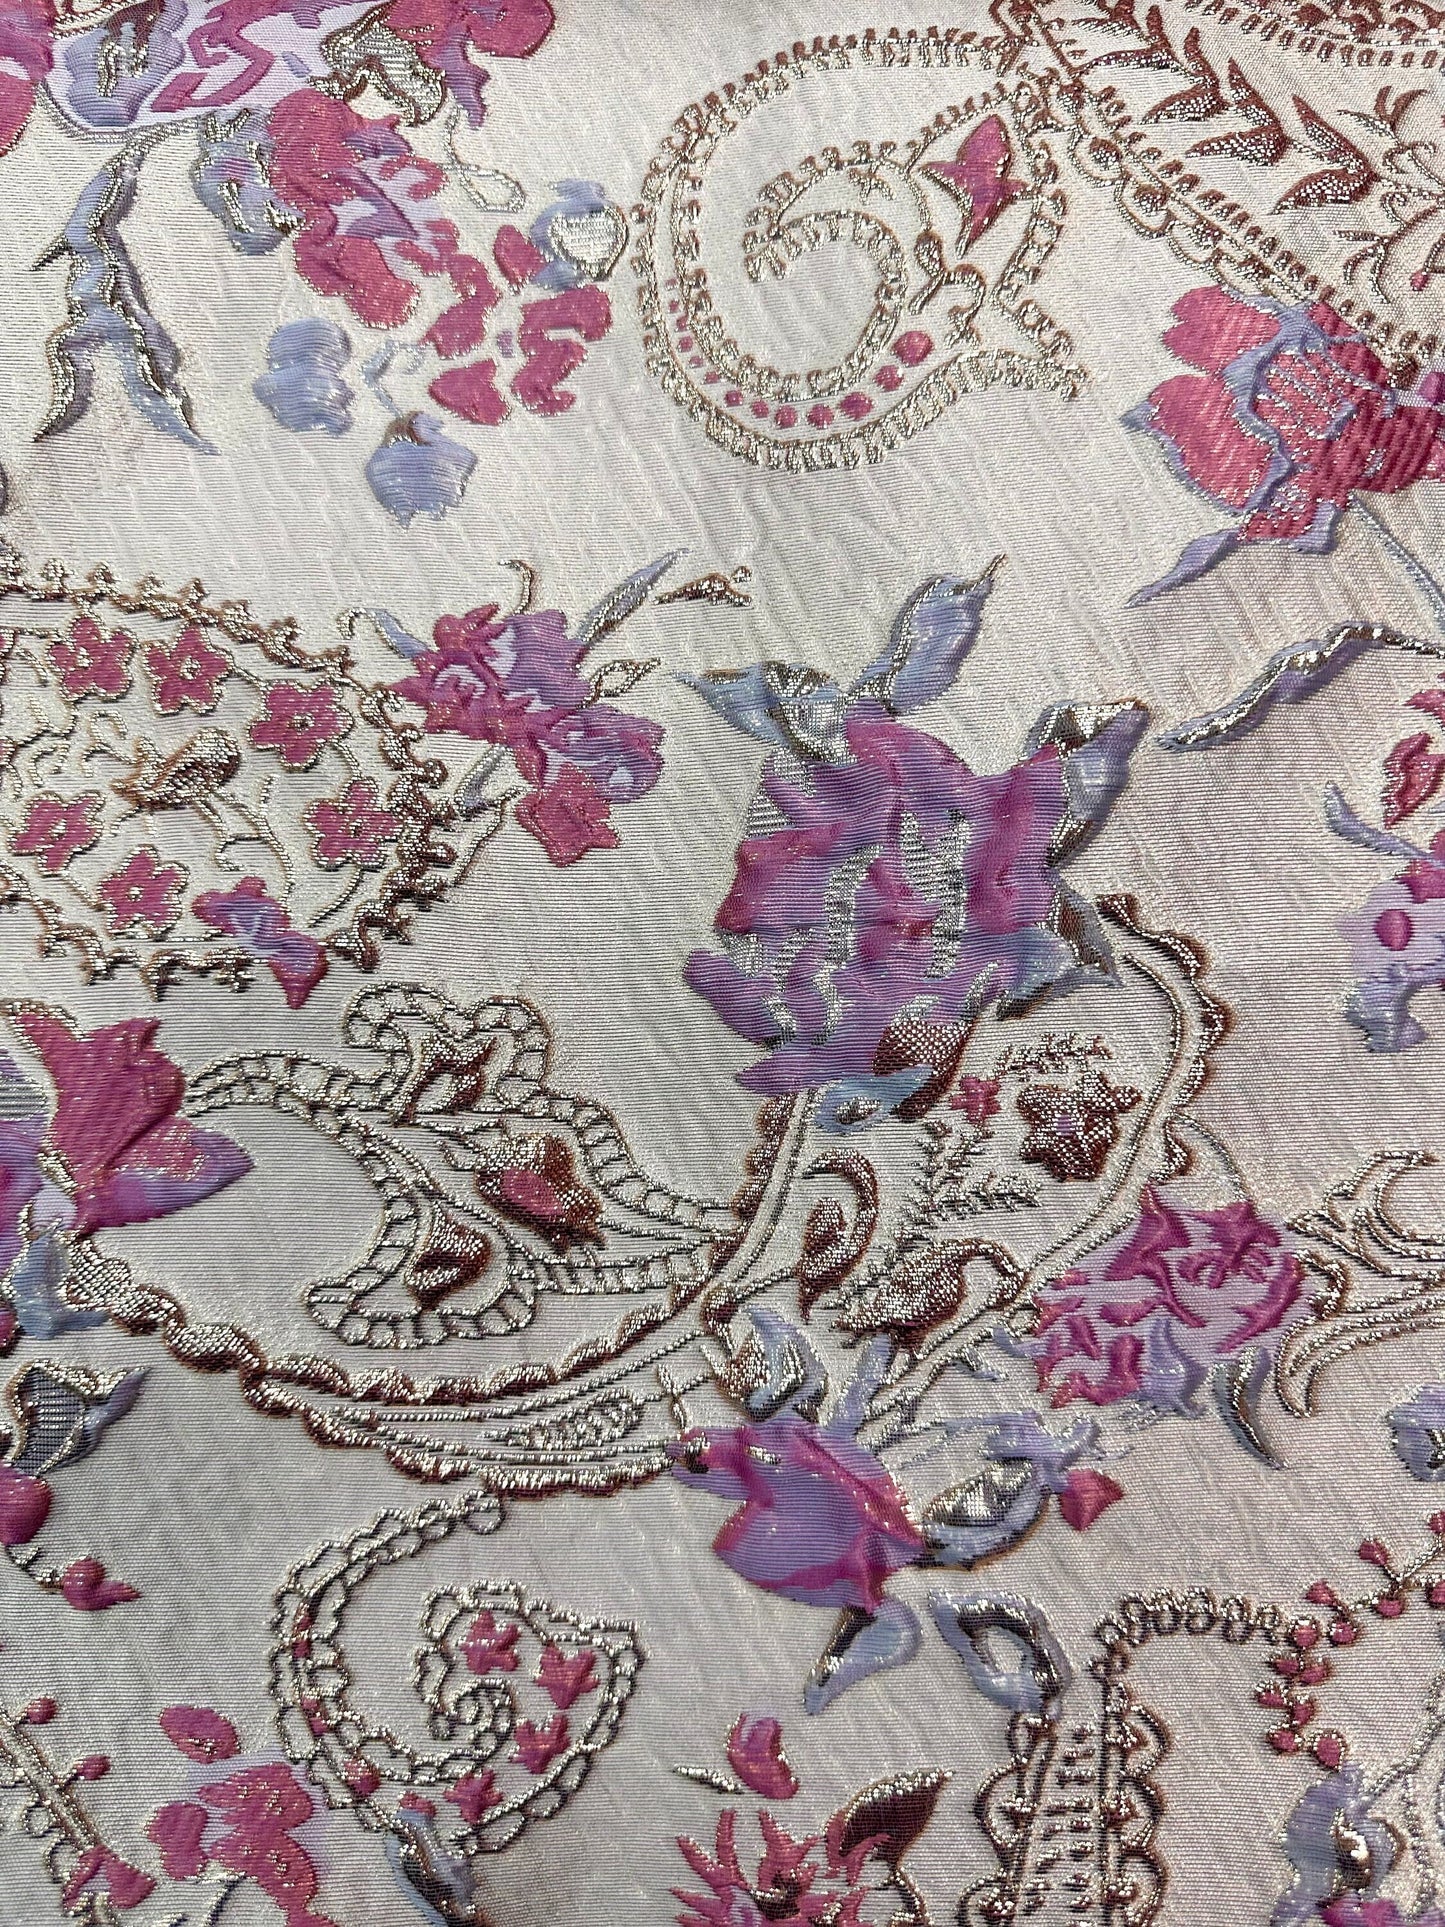 FUCHSIA LAVENDER GOLD Floral Paisley Brocade Fabric (60 in.) Sold By The Yard